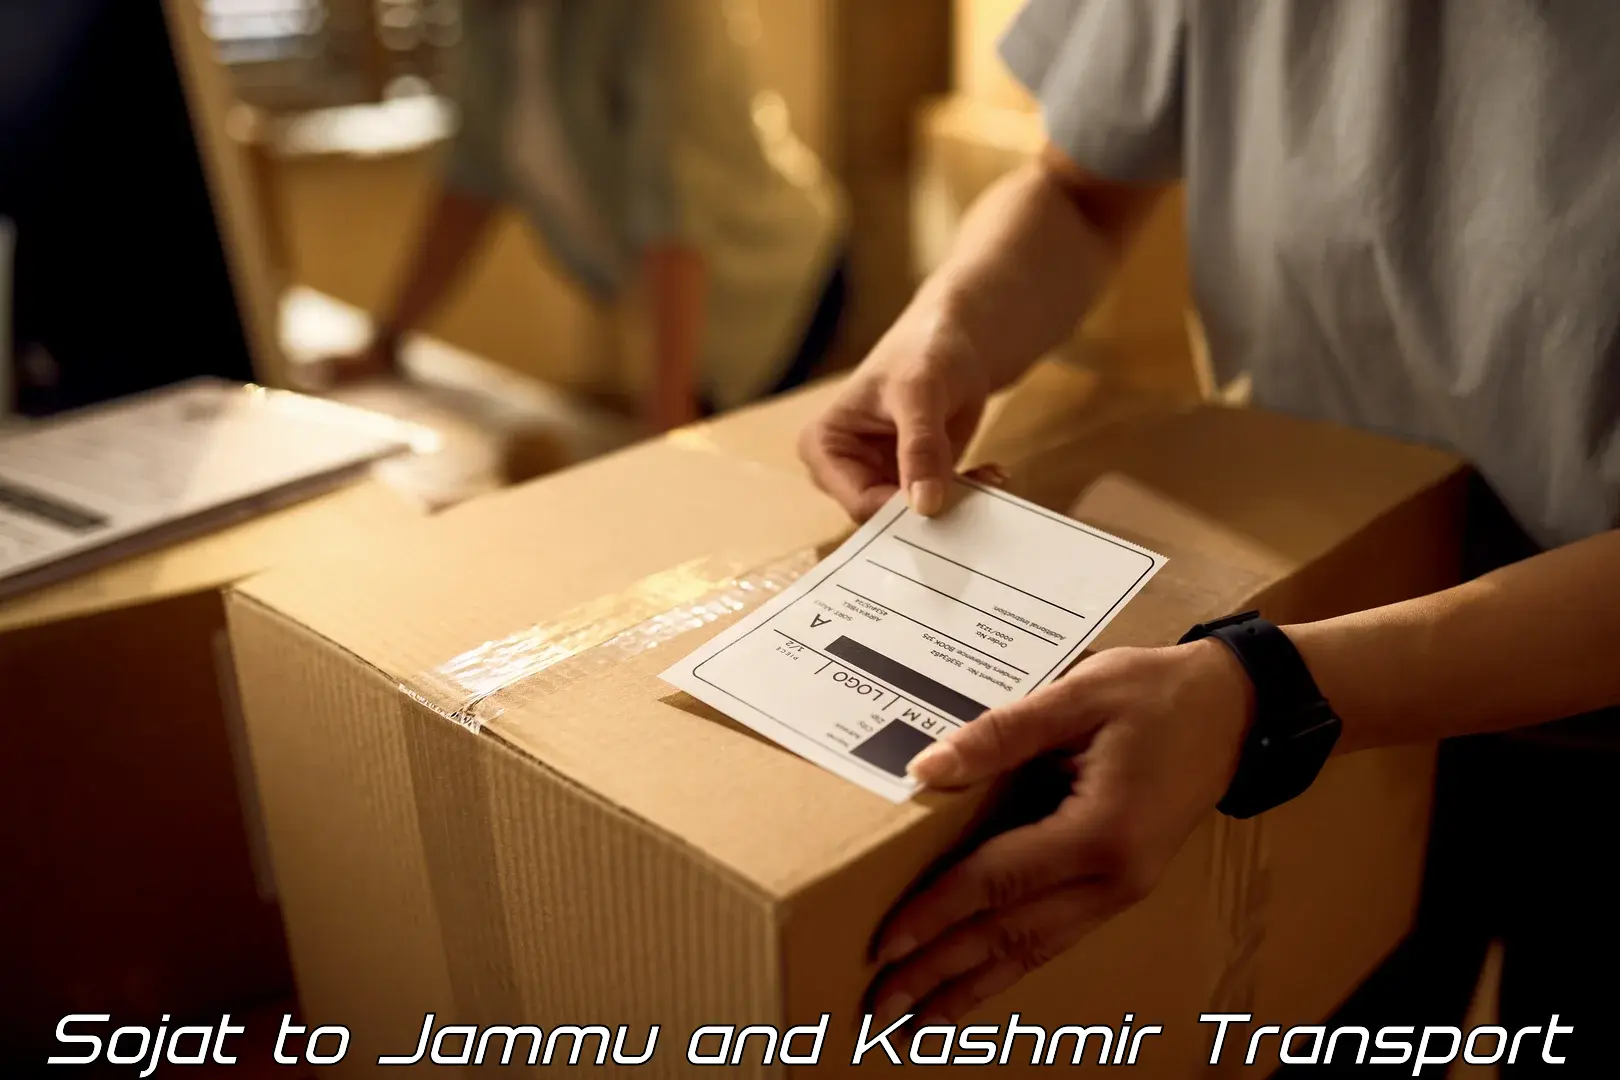 Daily parcel service transport Sojat to Baramulla